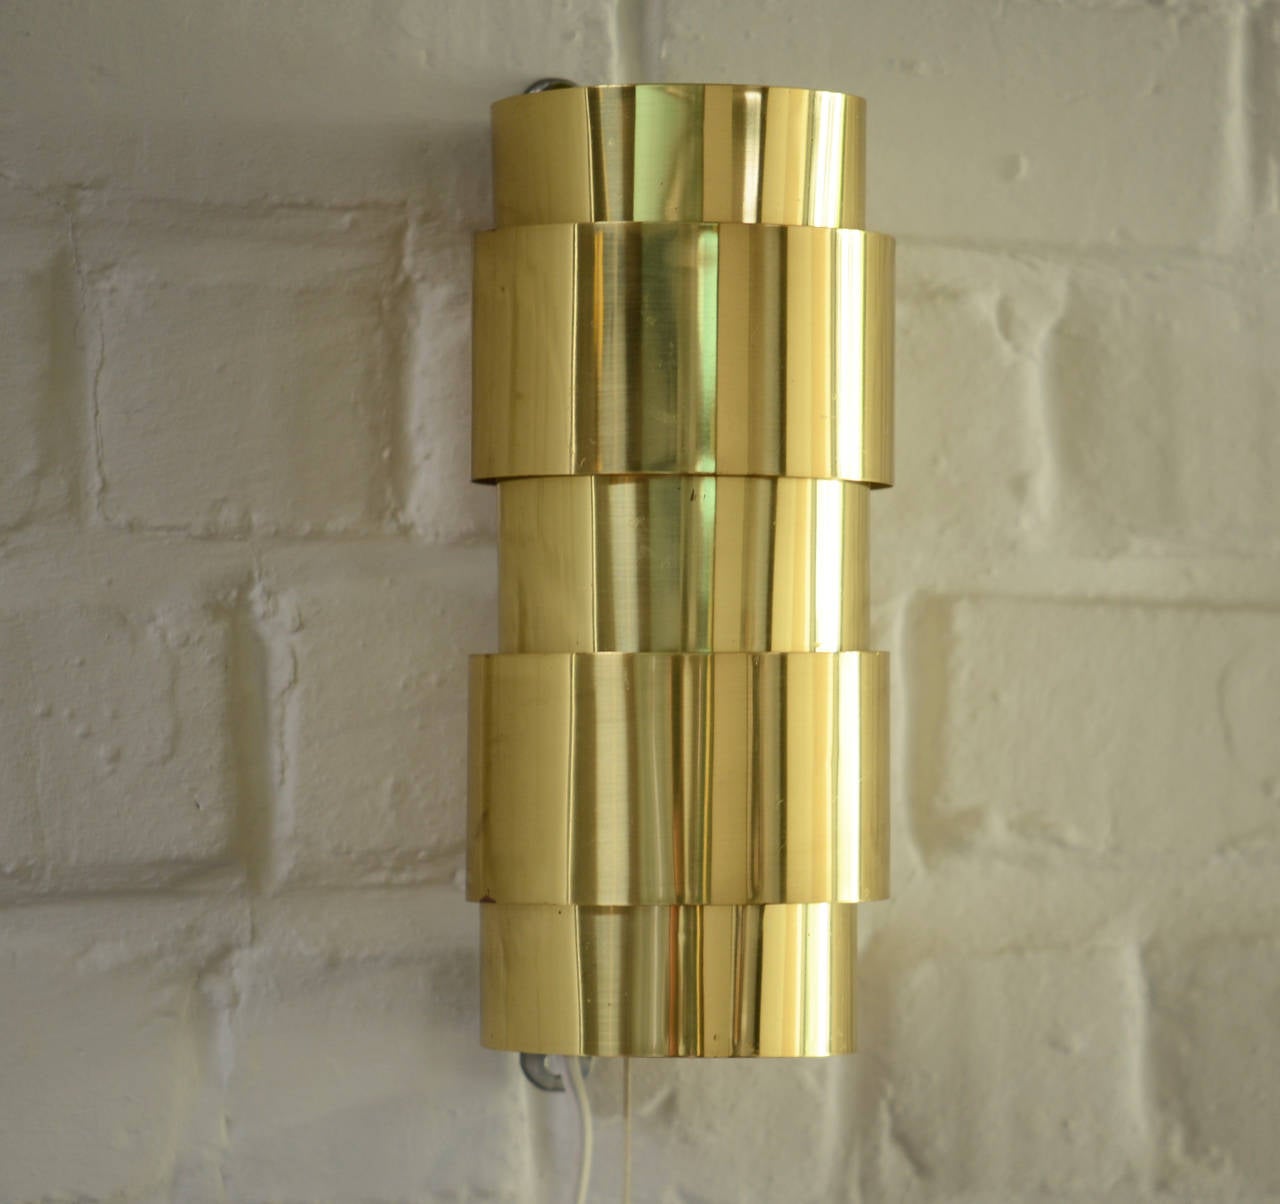 Hans-Agne Jakobsson brass wall lamps made by Markaryd, Sweden.

Two available.